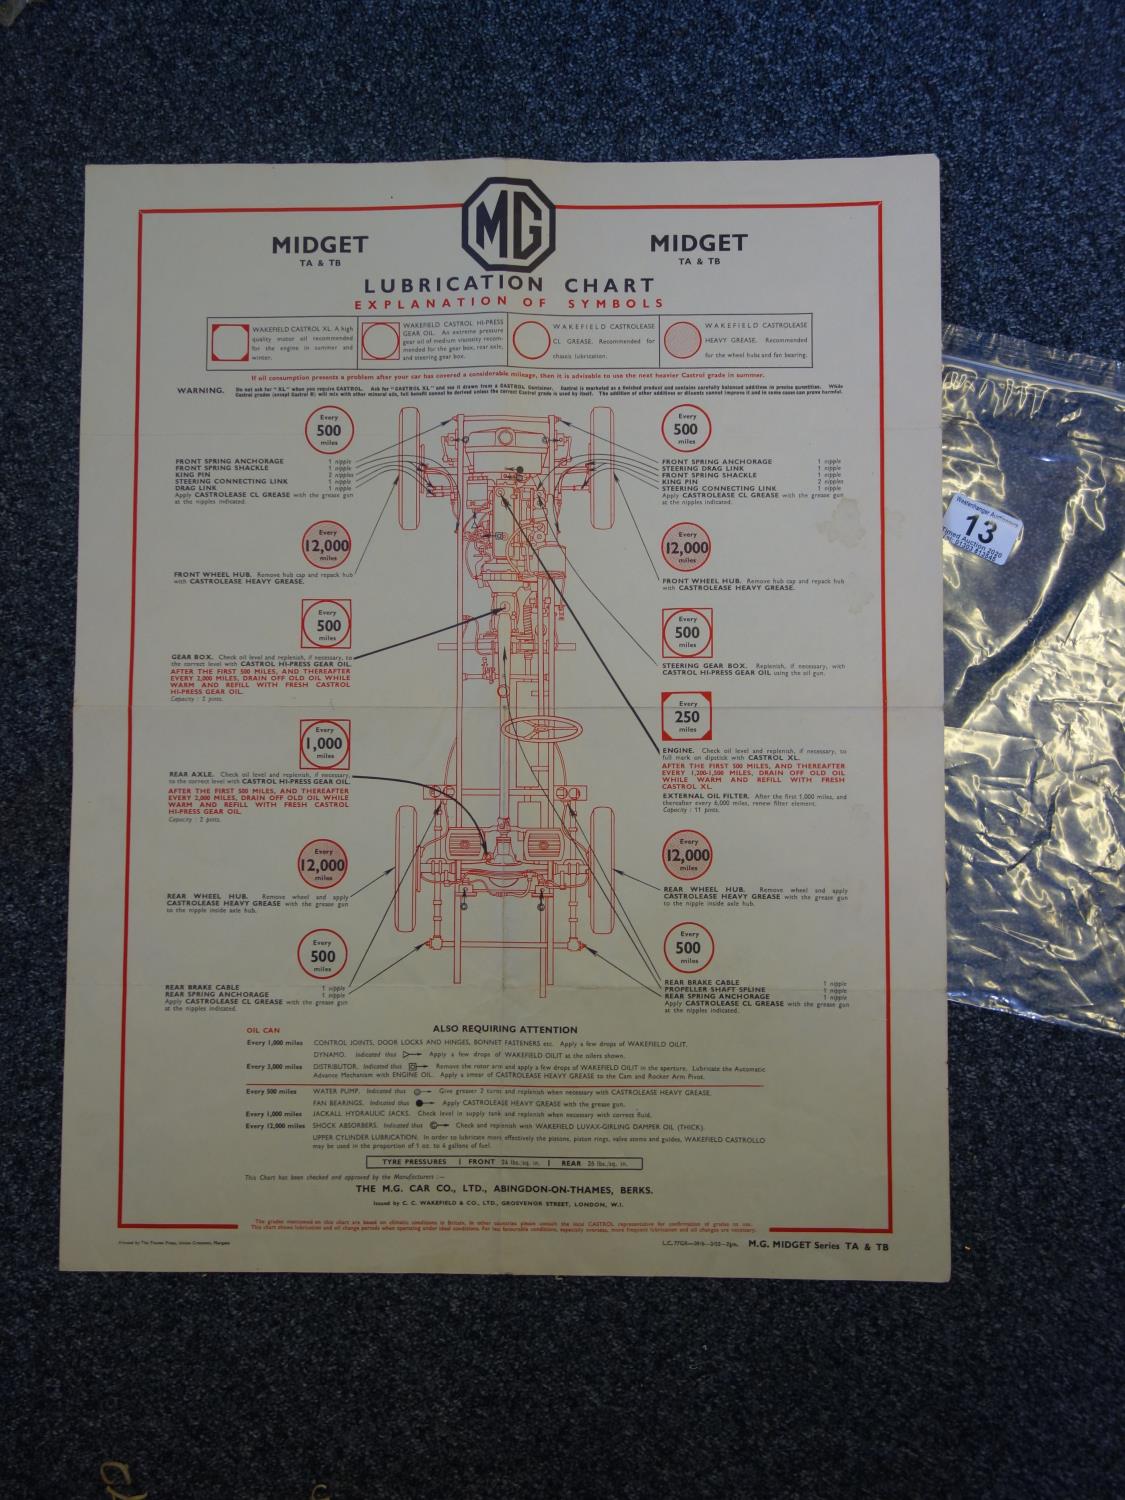 Wall Art MG Midget, lubrication chart, issued by C C Wakefeld & Co 22" x 18" good condition